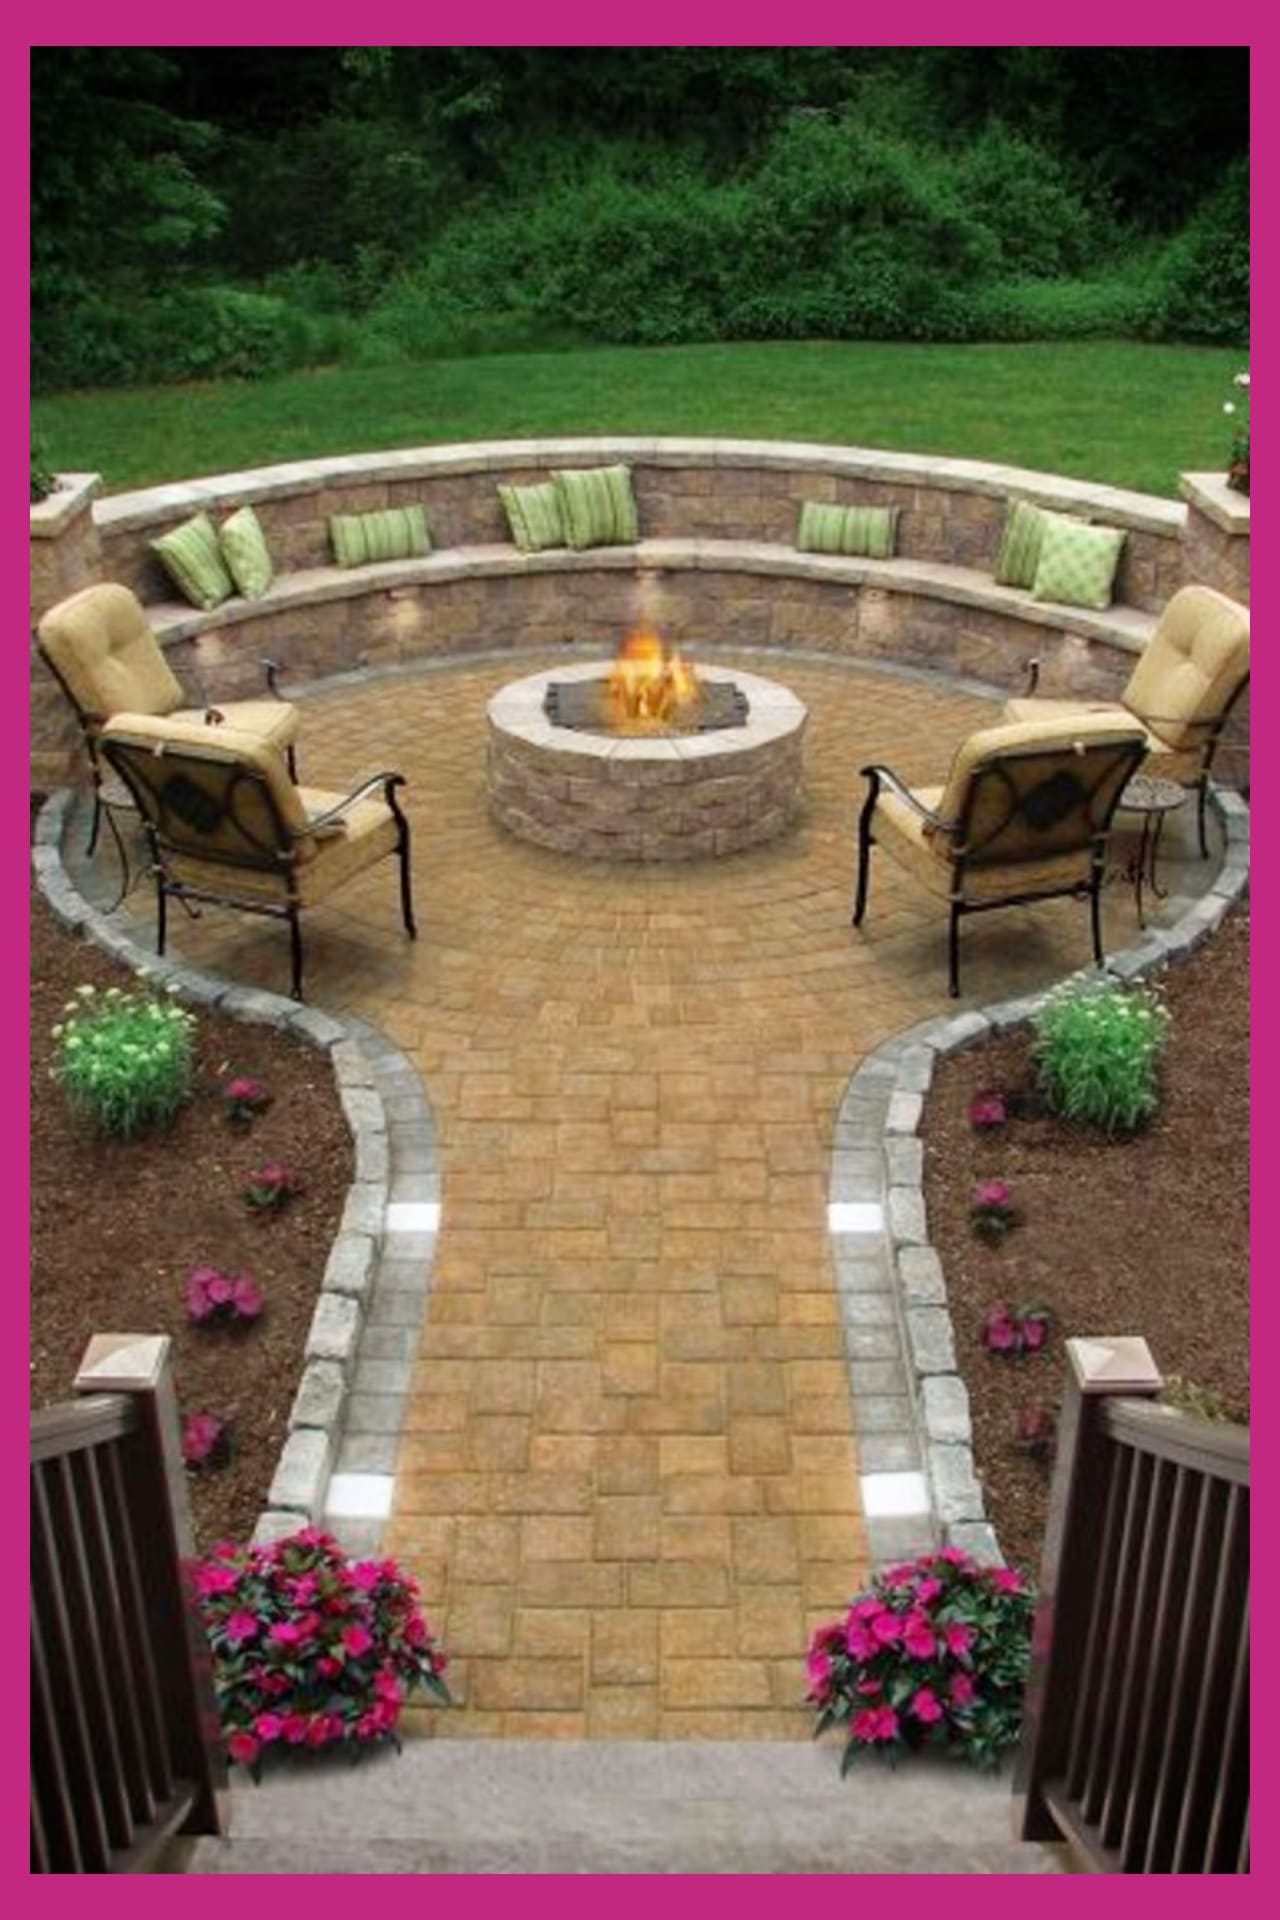 outdoor fire pit seating ideas for your backyard firepit - backyard patio fire pit design seating area